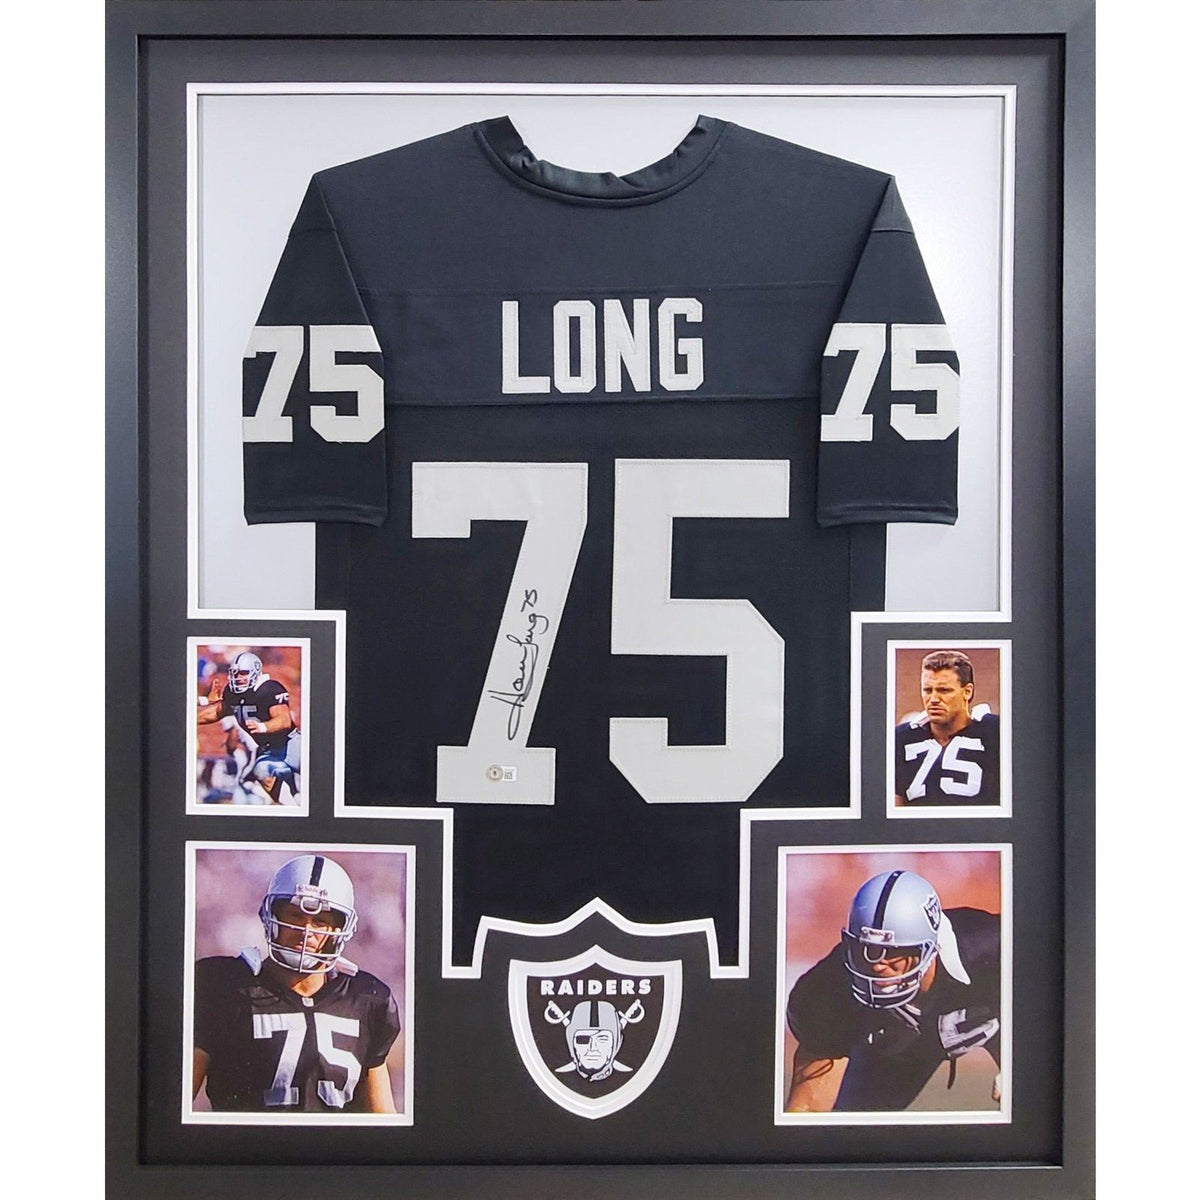 Howie Long Signed Framed Jersey Beckett Autographed Oakland Raiders